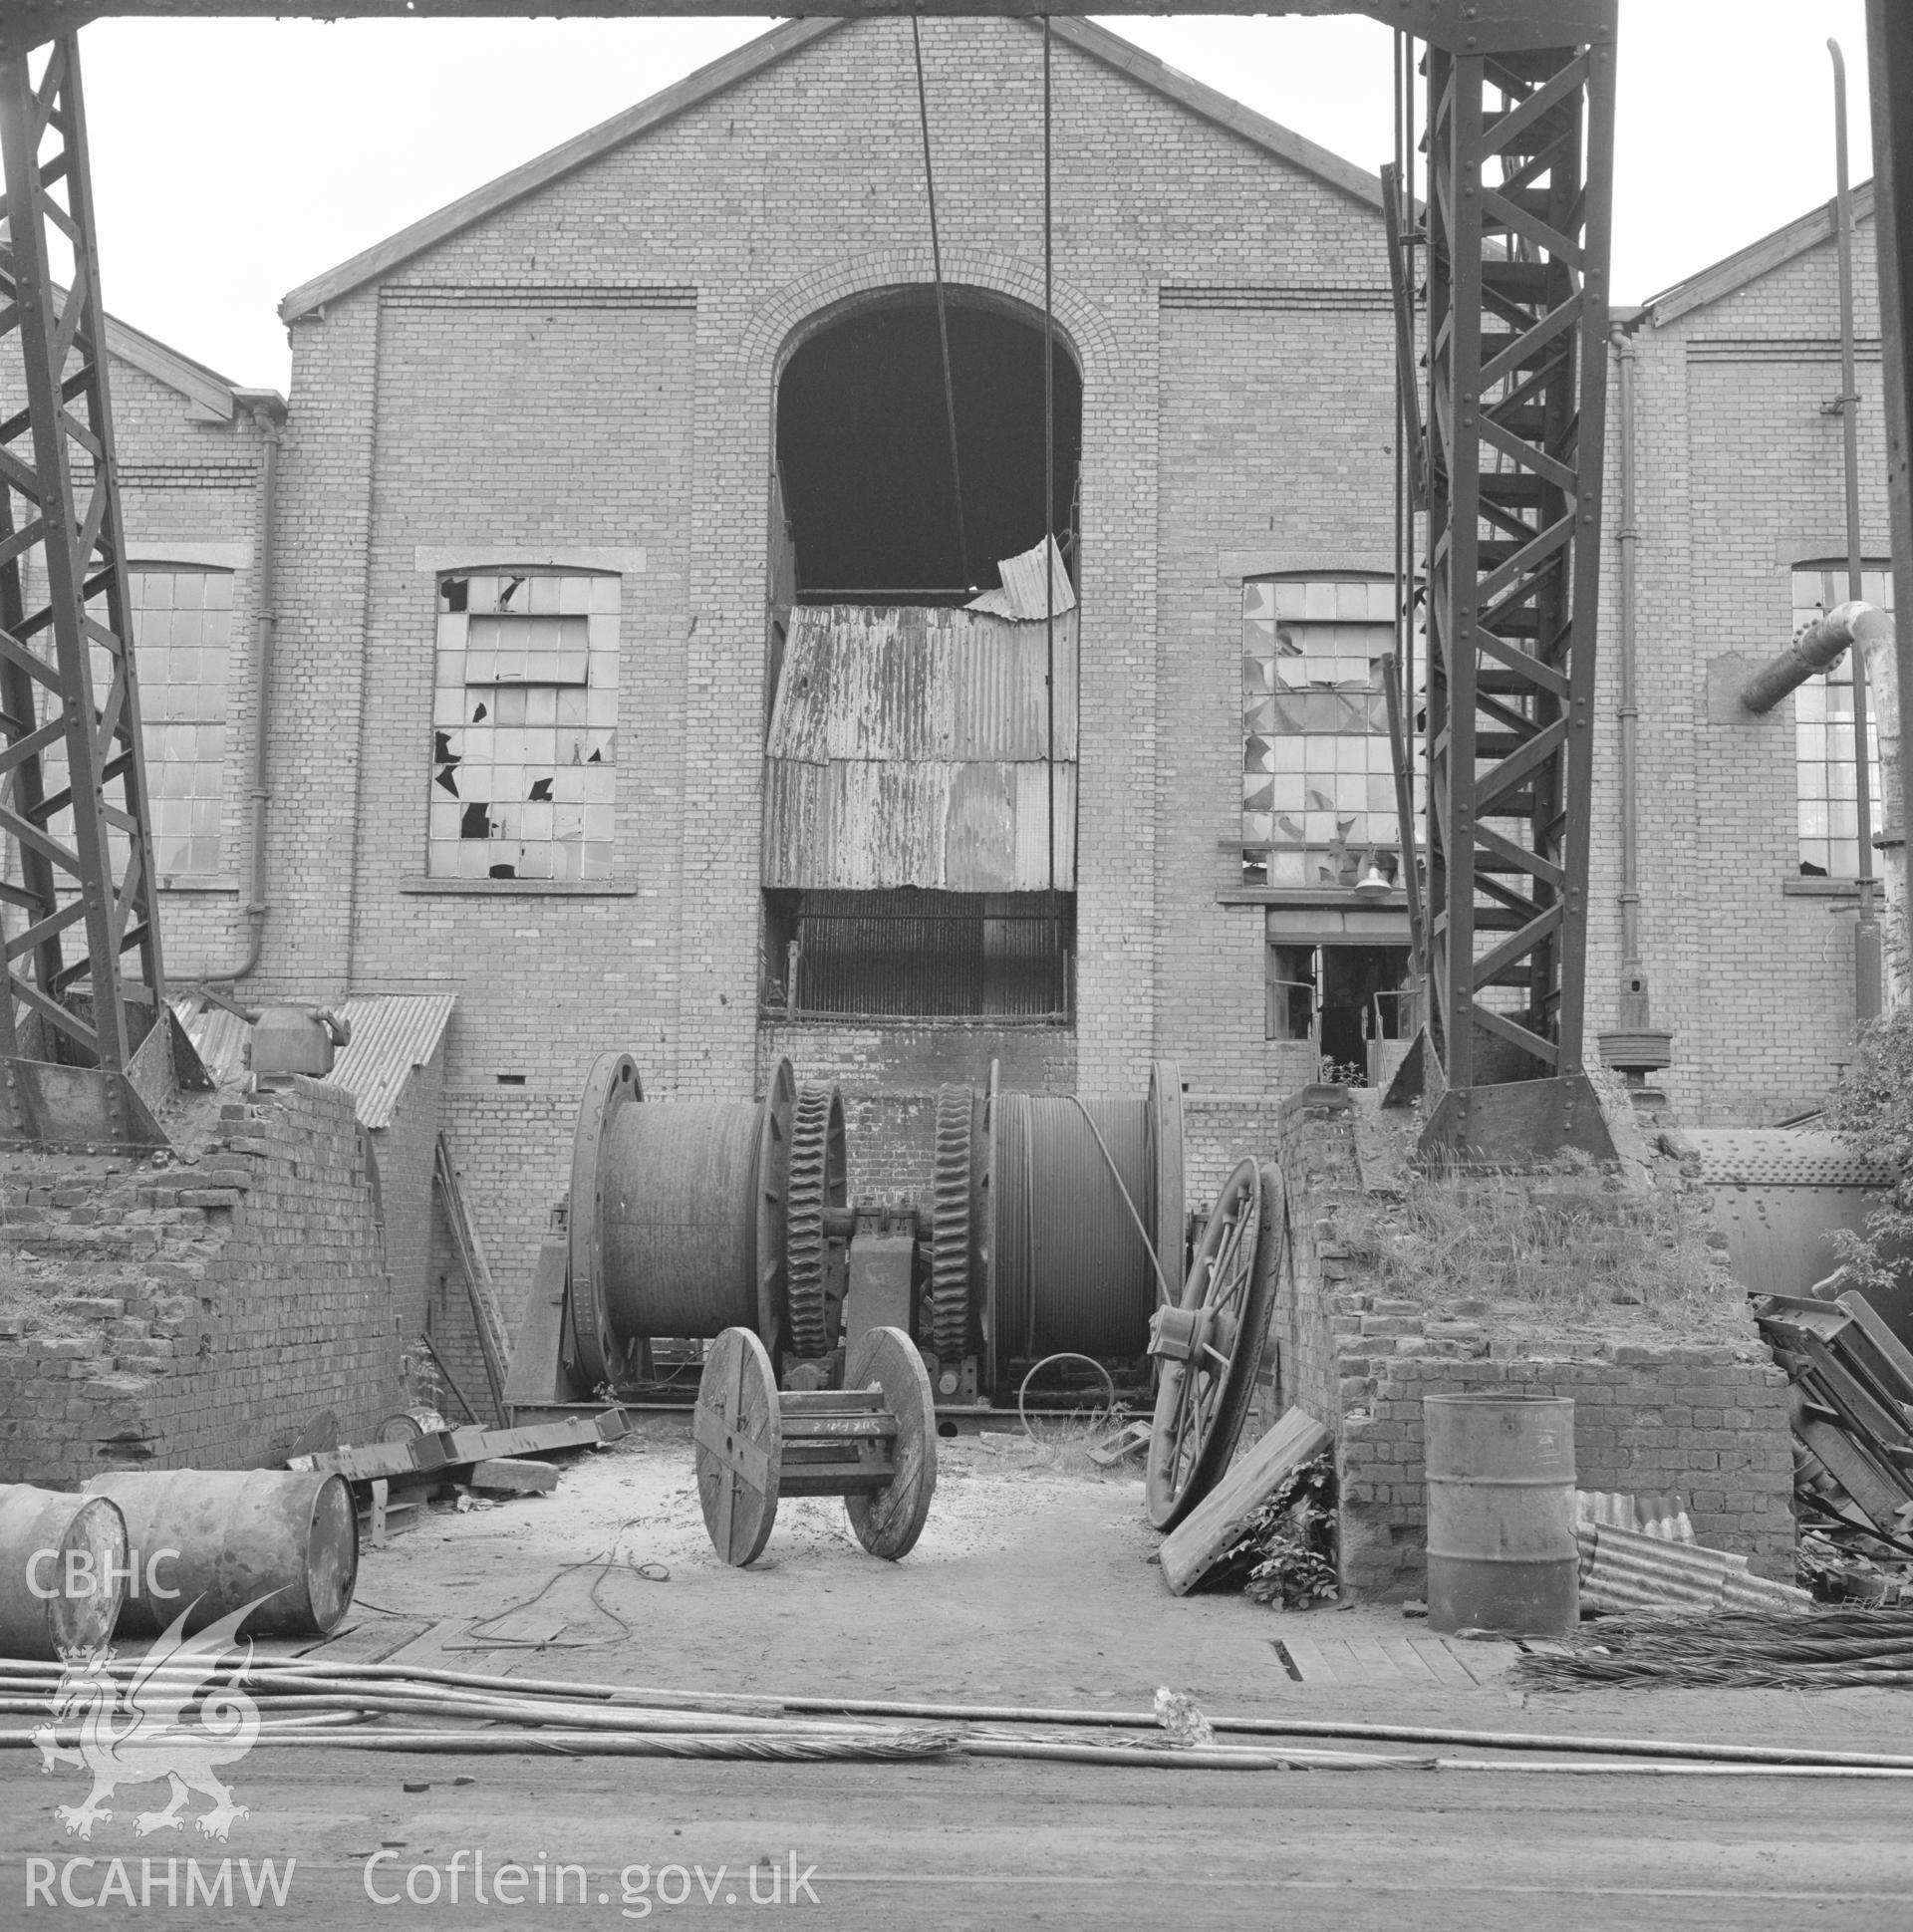 Digital copy of an acetate negative showing winding drums at Blaenant Colliery, from the John Cornwell Collection.